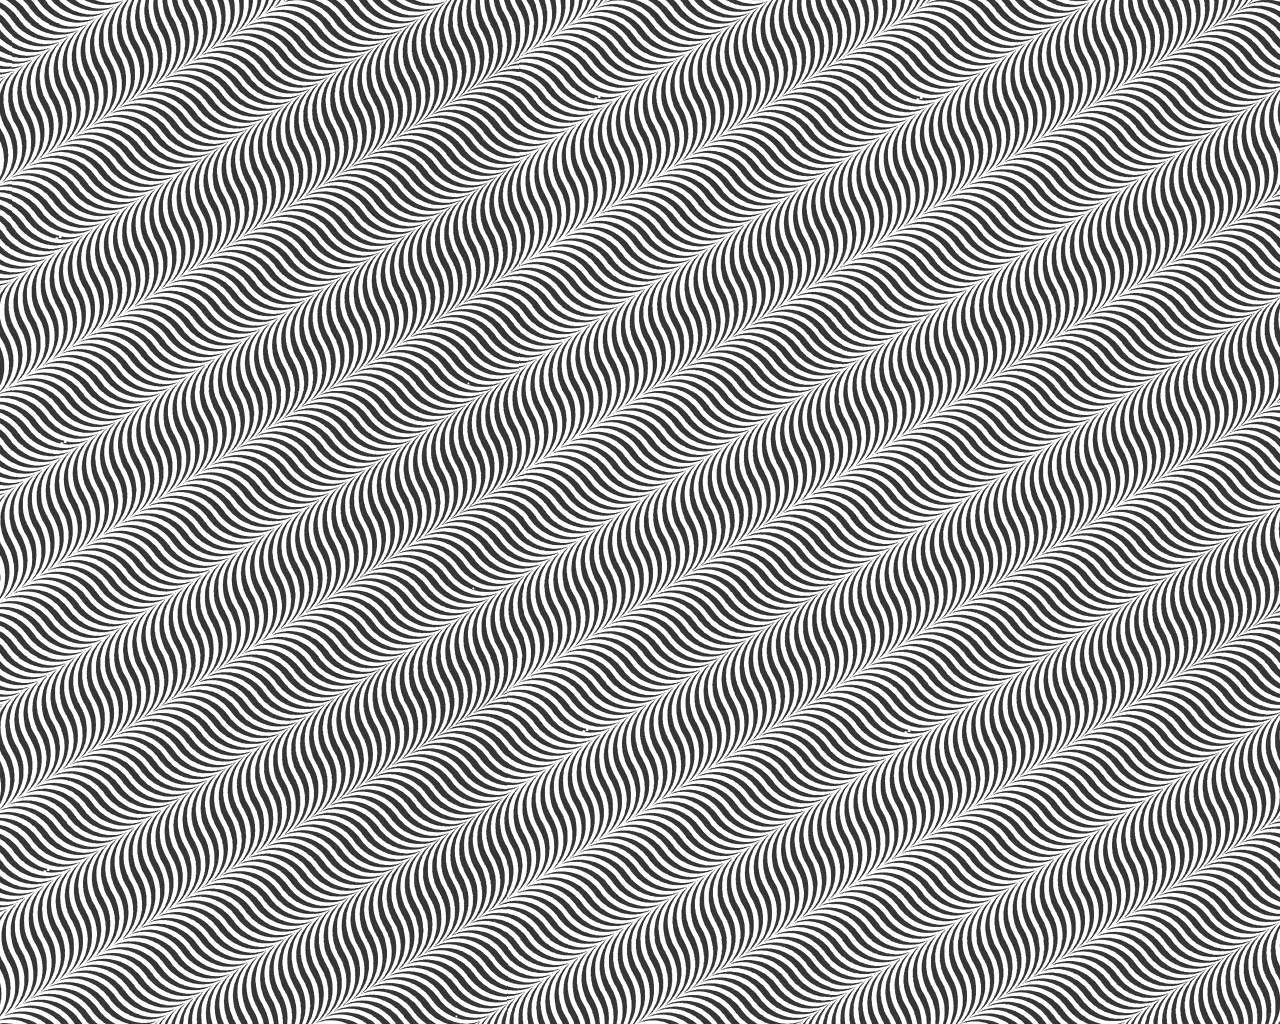 Image Of Optical Illusions Wallpaper